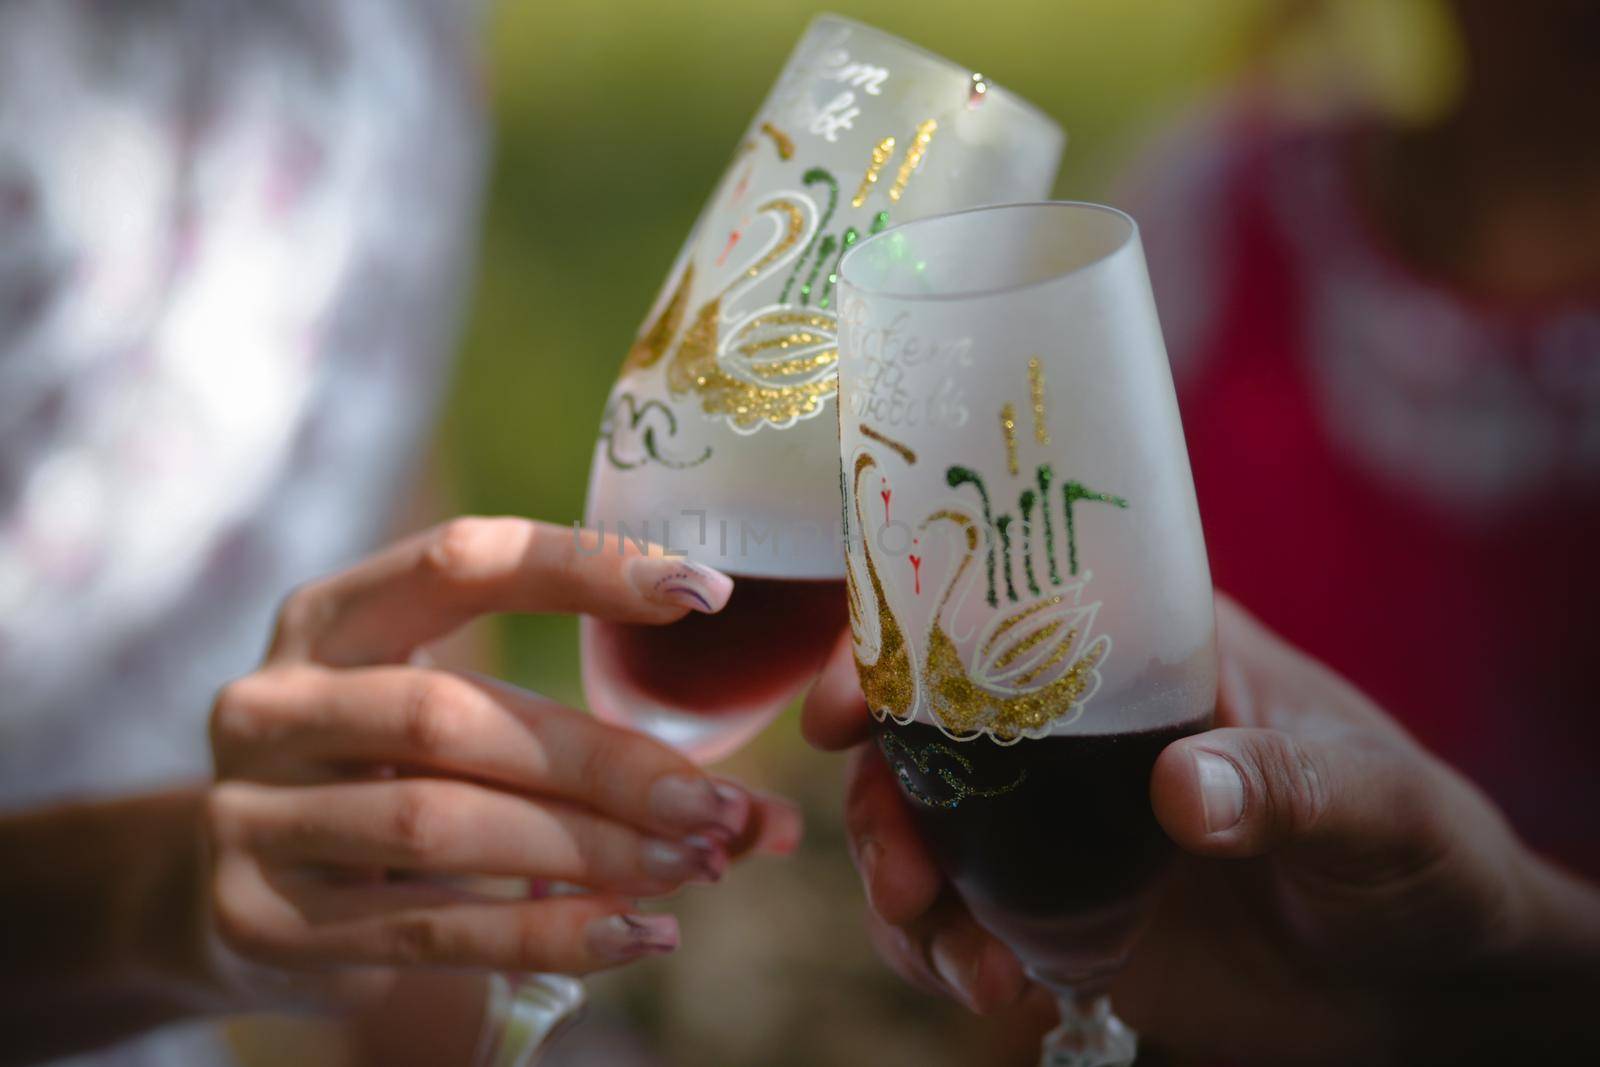 Hands of a man and a woman close-up holding glasses of red wine